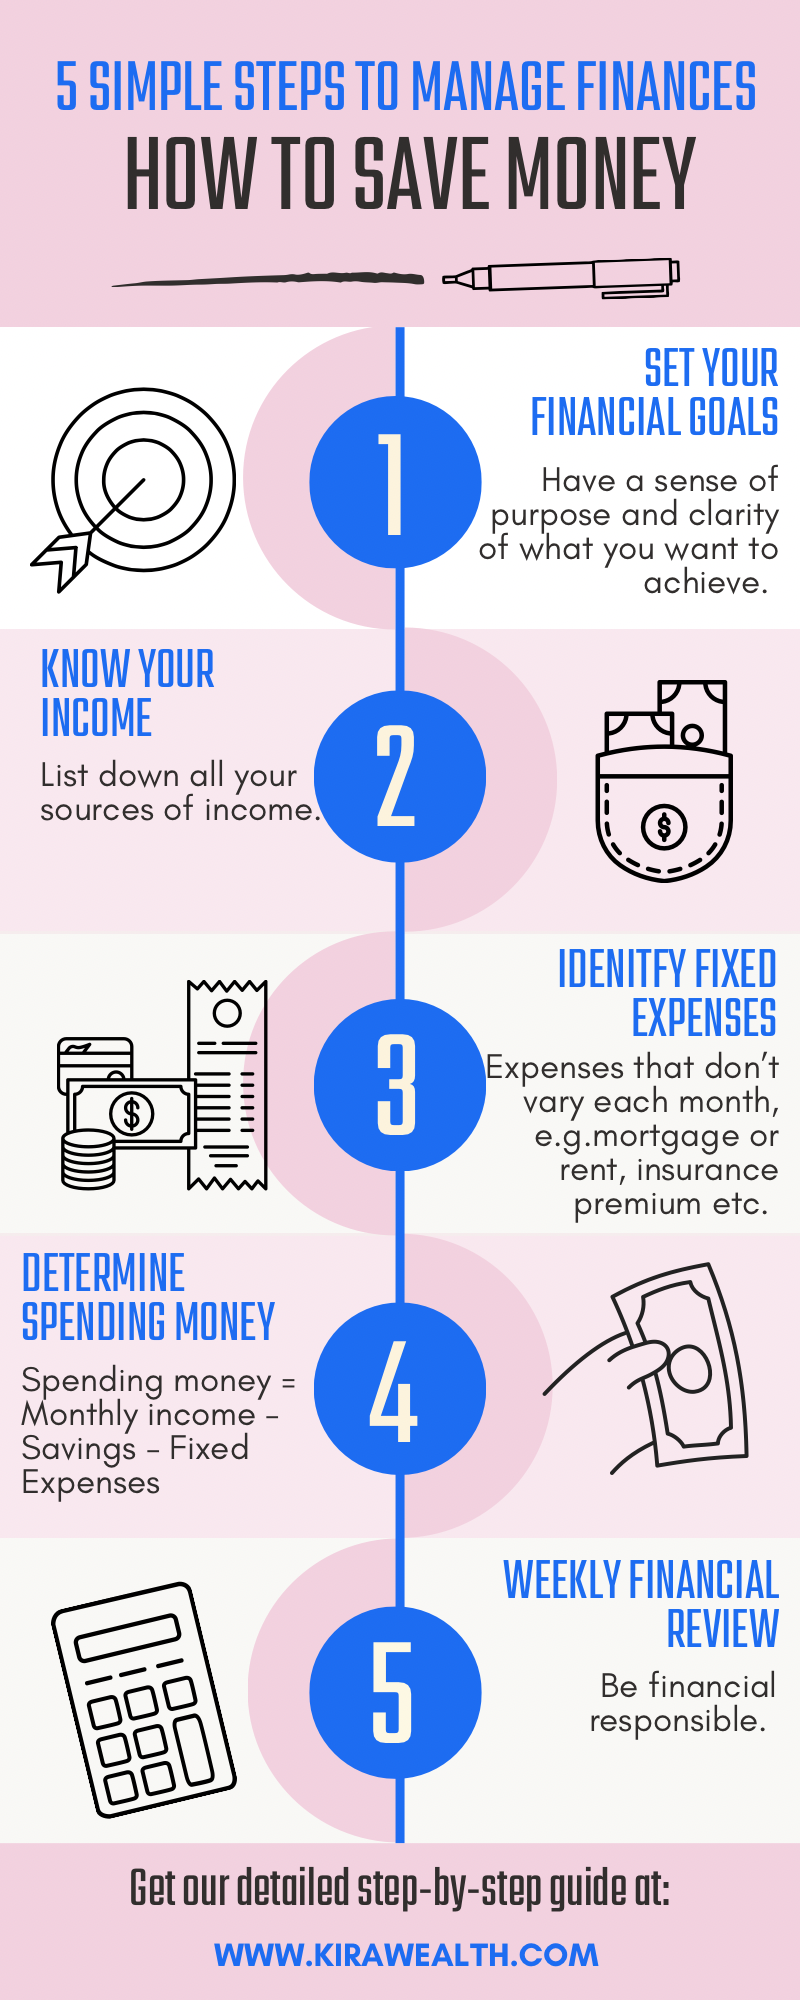 How to save money 5 simple steps manage finances infographic